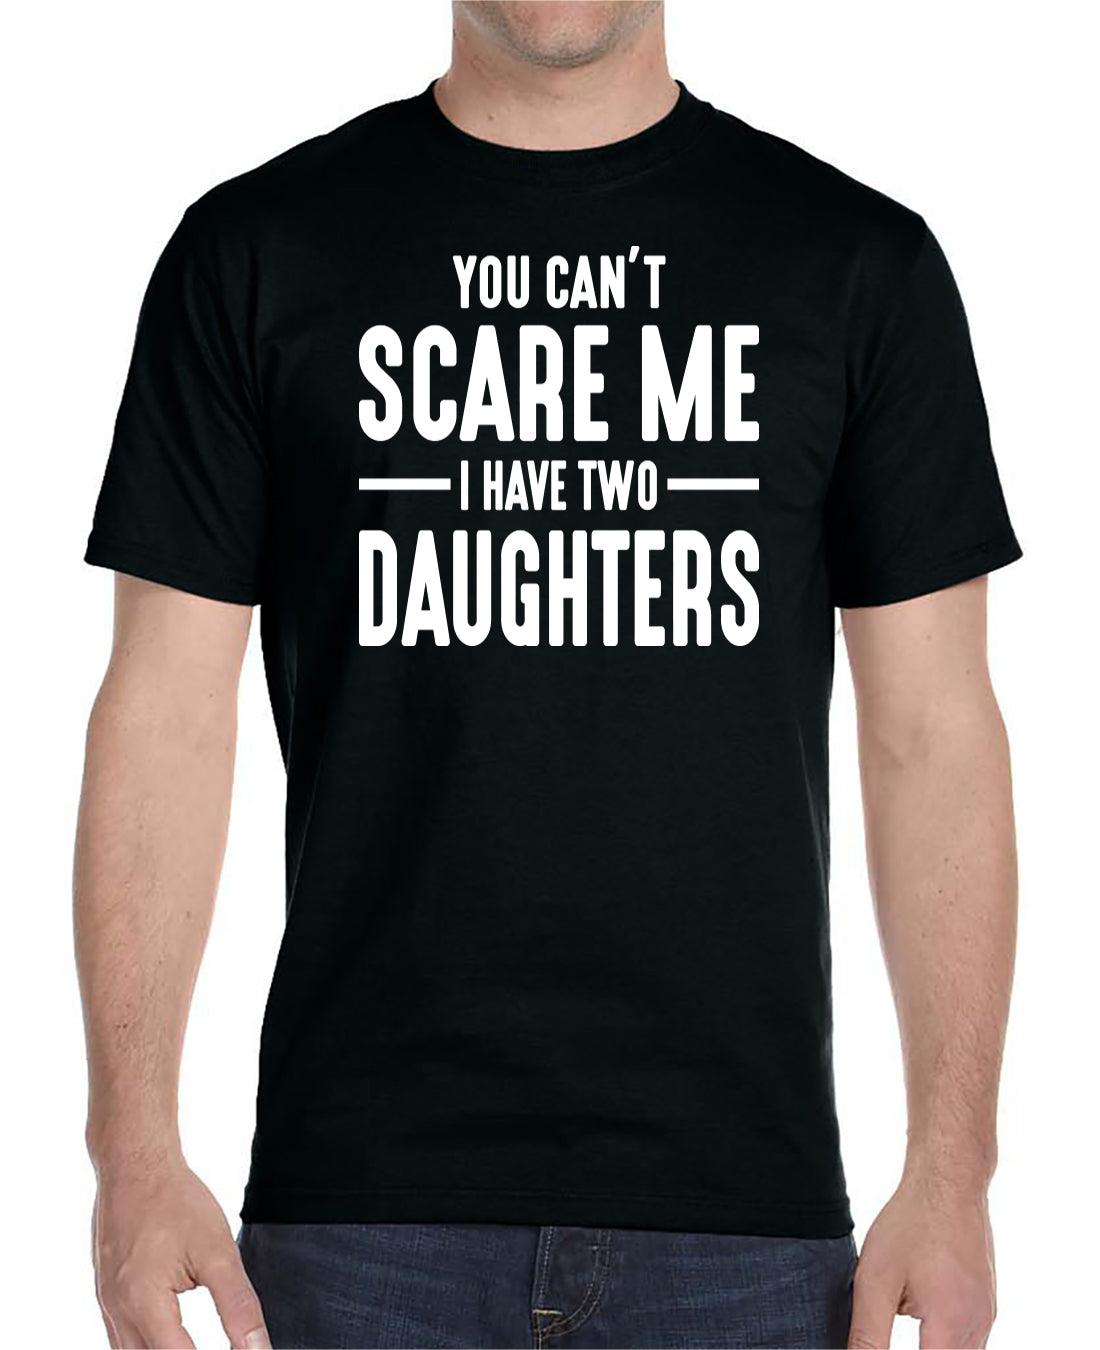 You Can't Scare Me I Have Two Daughters - Unisex T-Shirt - Dad Shirt - Dad Gift - familyteeprints